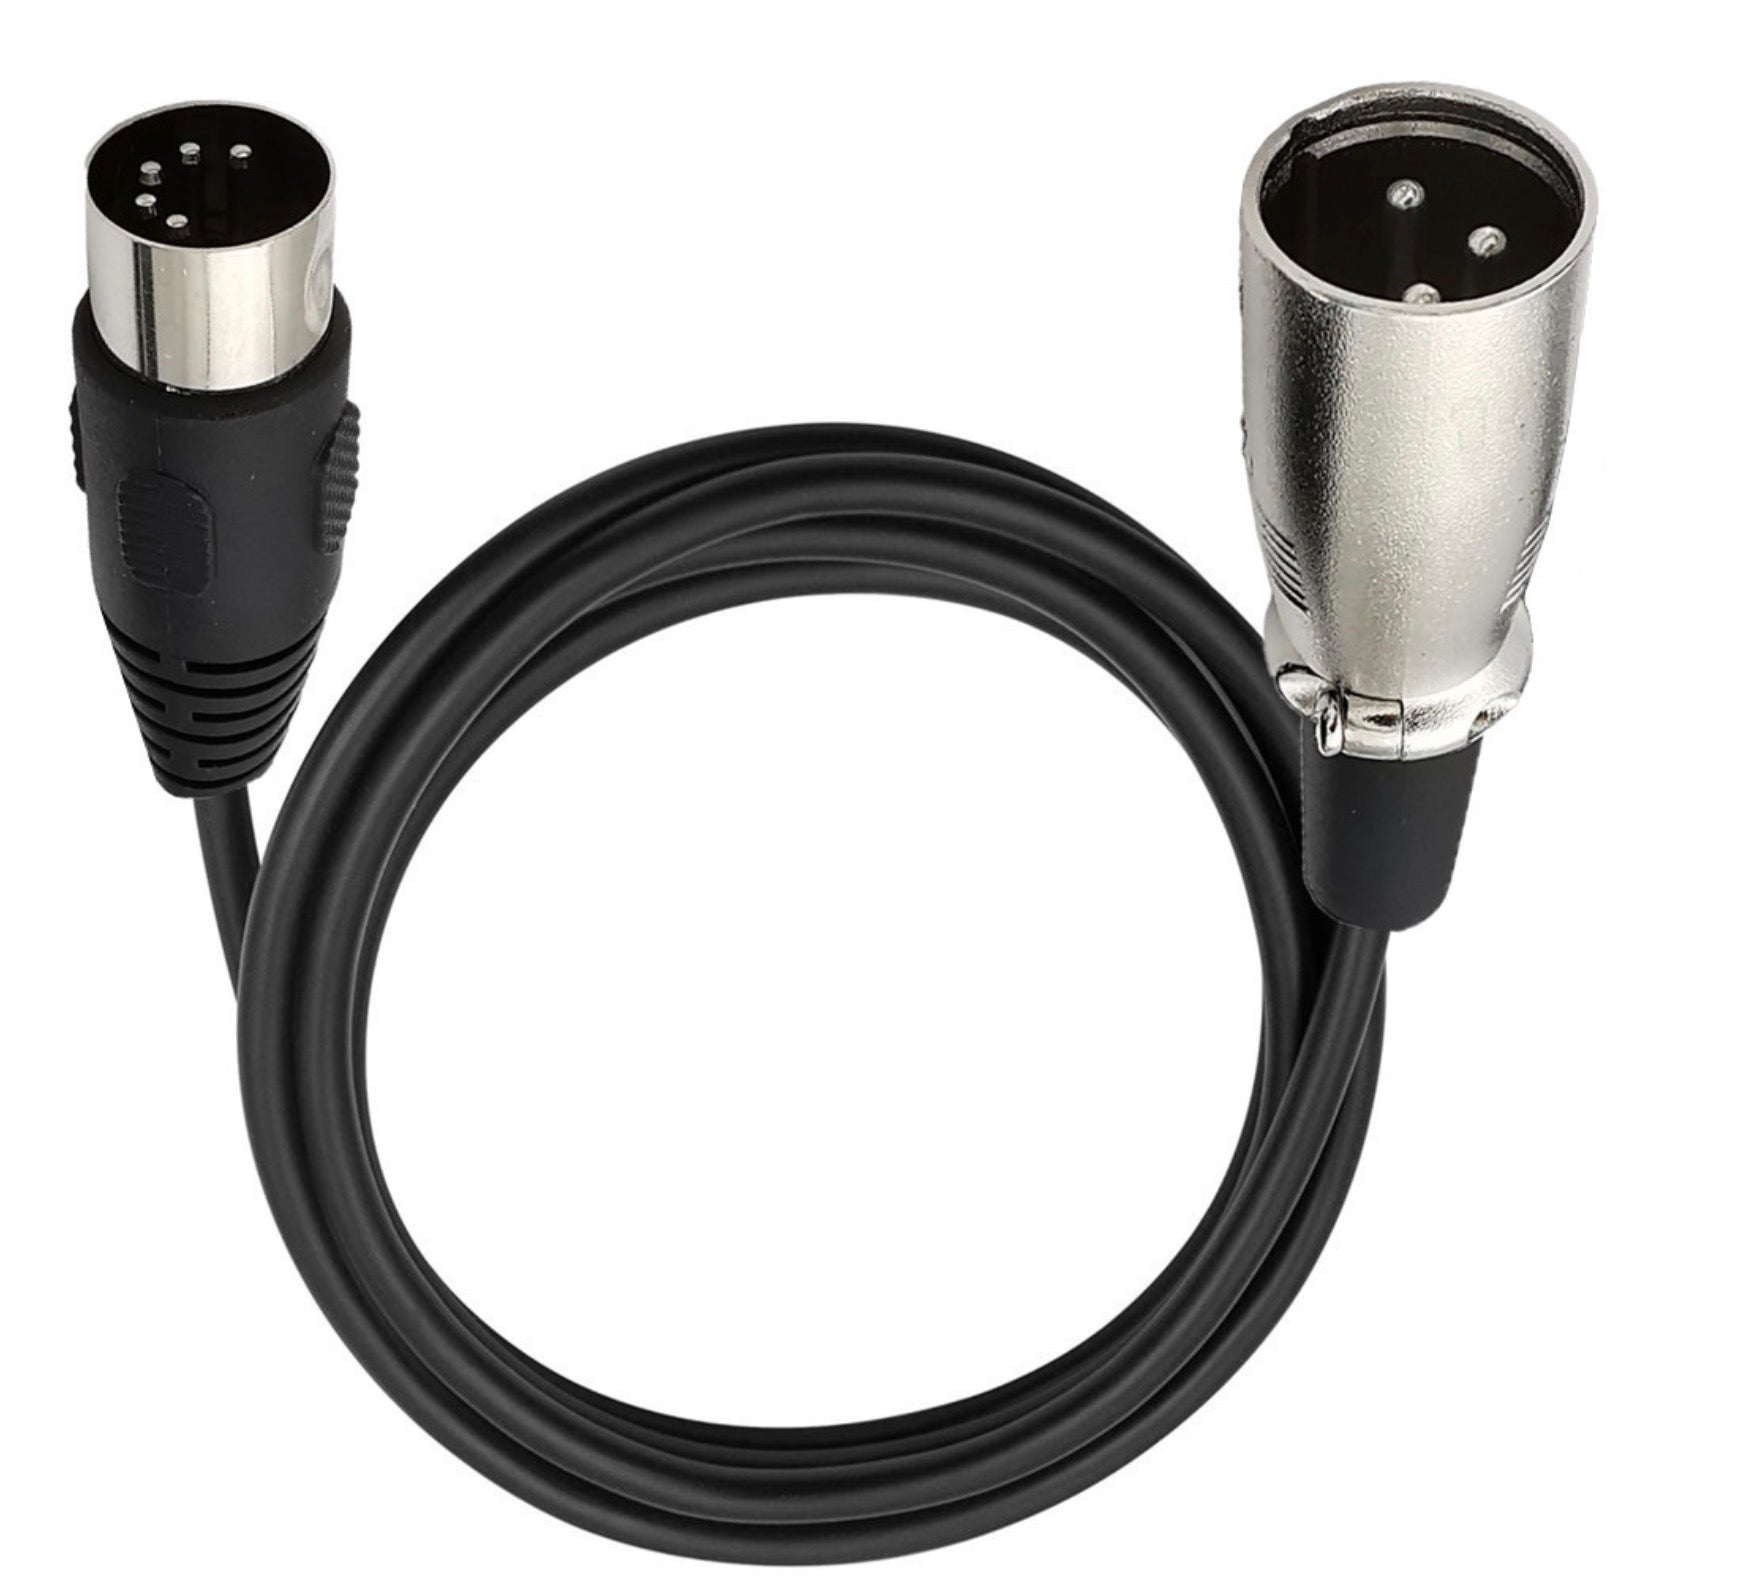 5-Pin Din Male to XLR 3 Pin Male Audio Cable for Musical Instruments